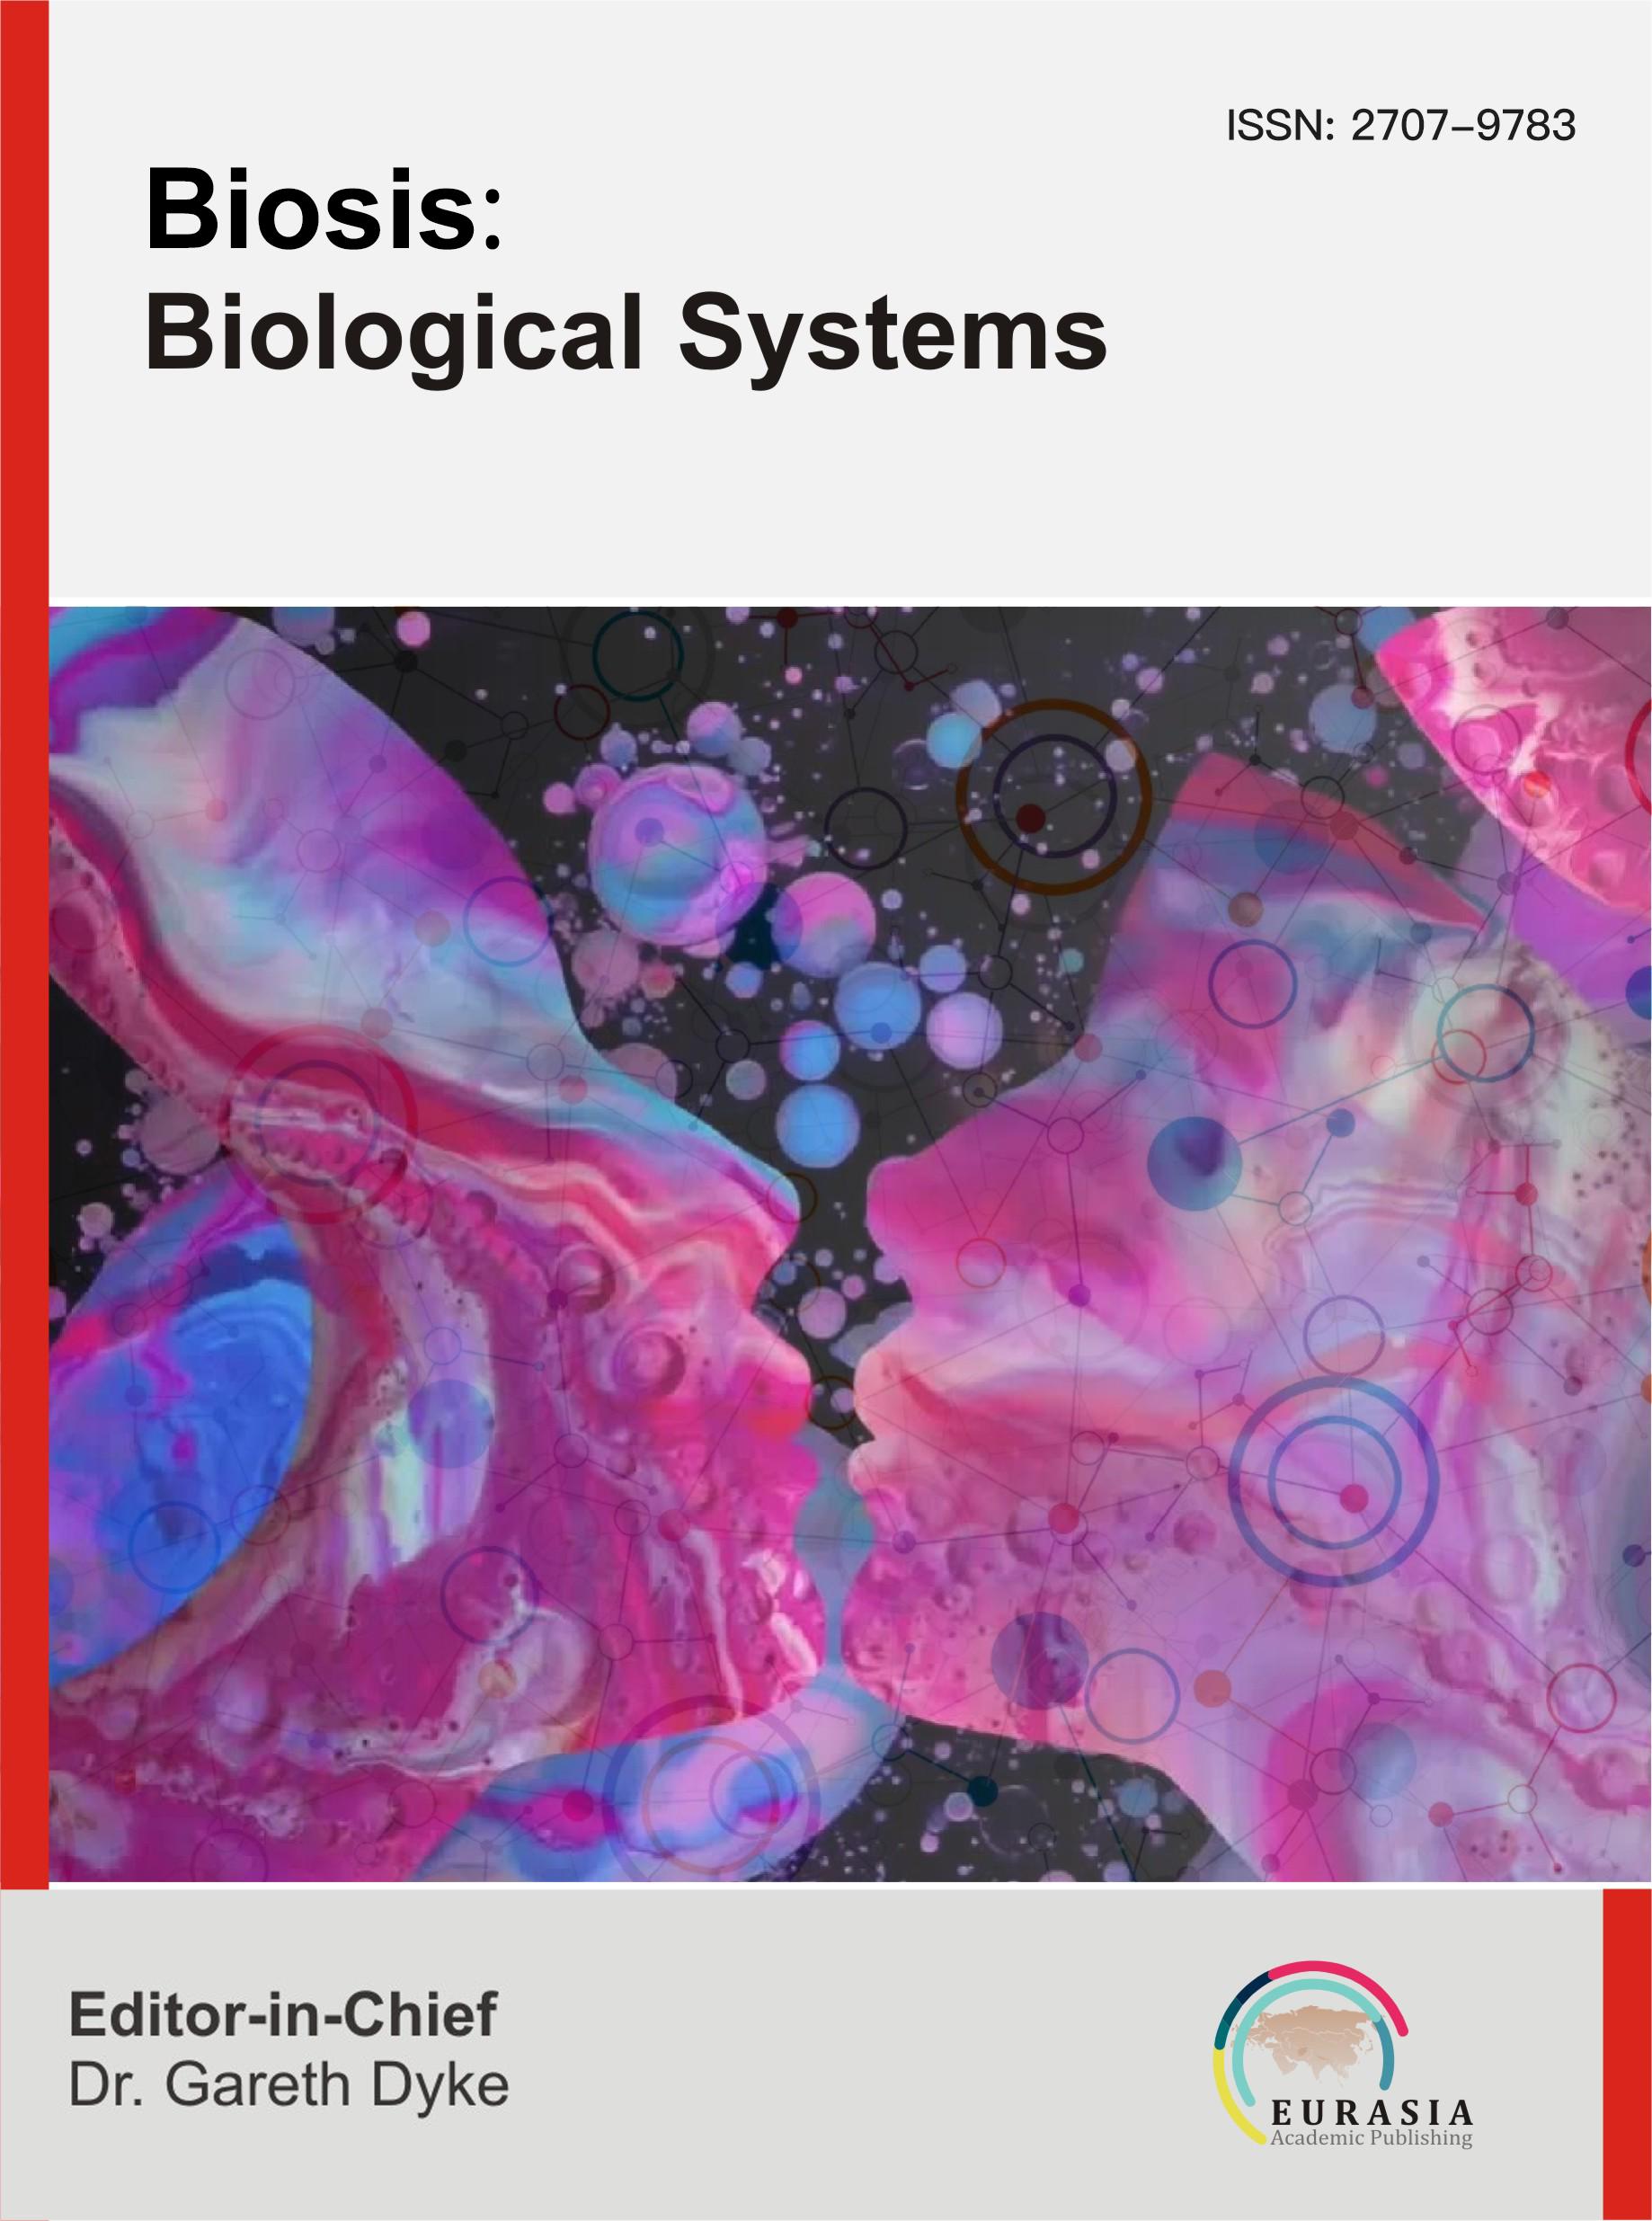 					View Vol. 2 No. 4 (2021): Biosis: Biological Systems
				